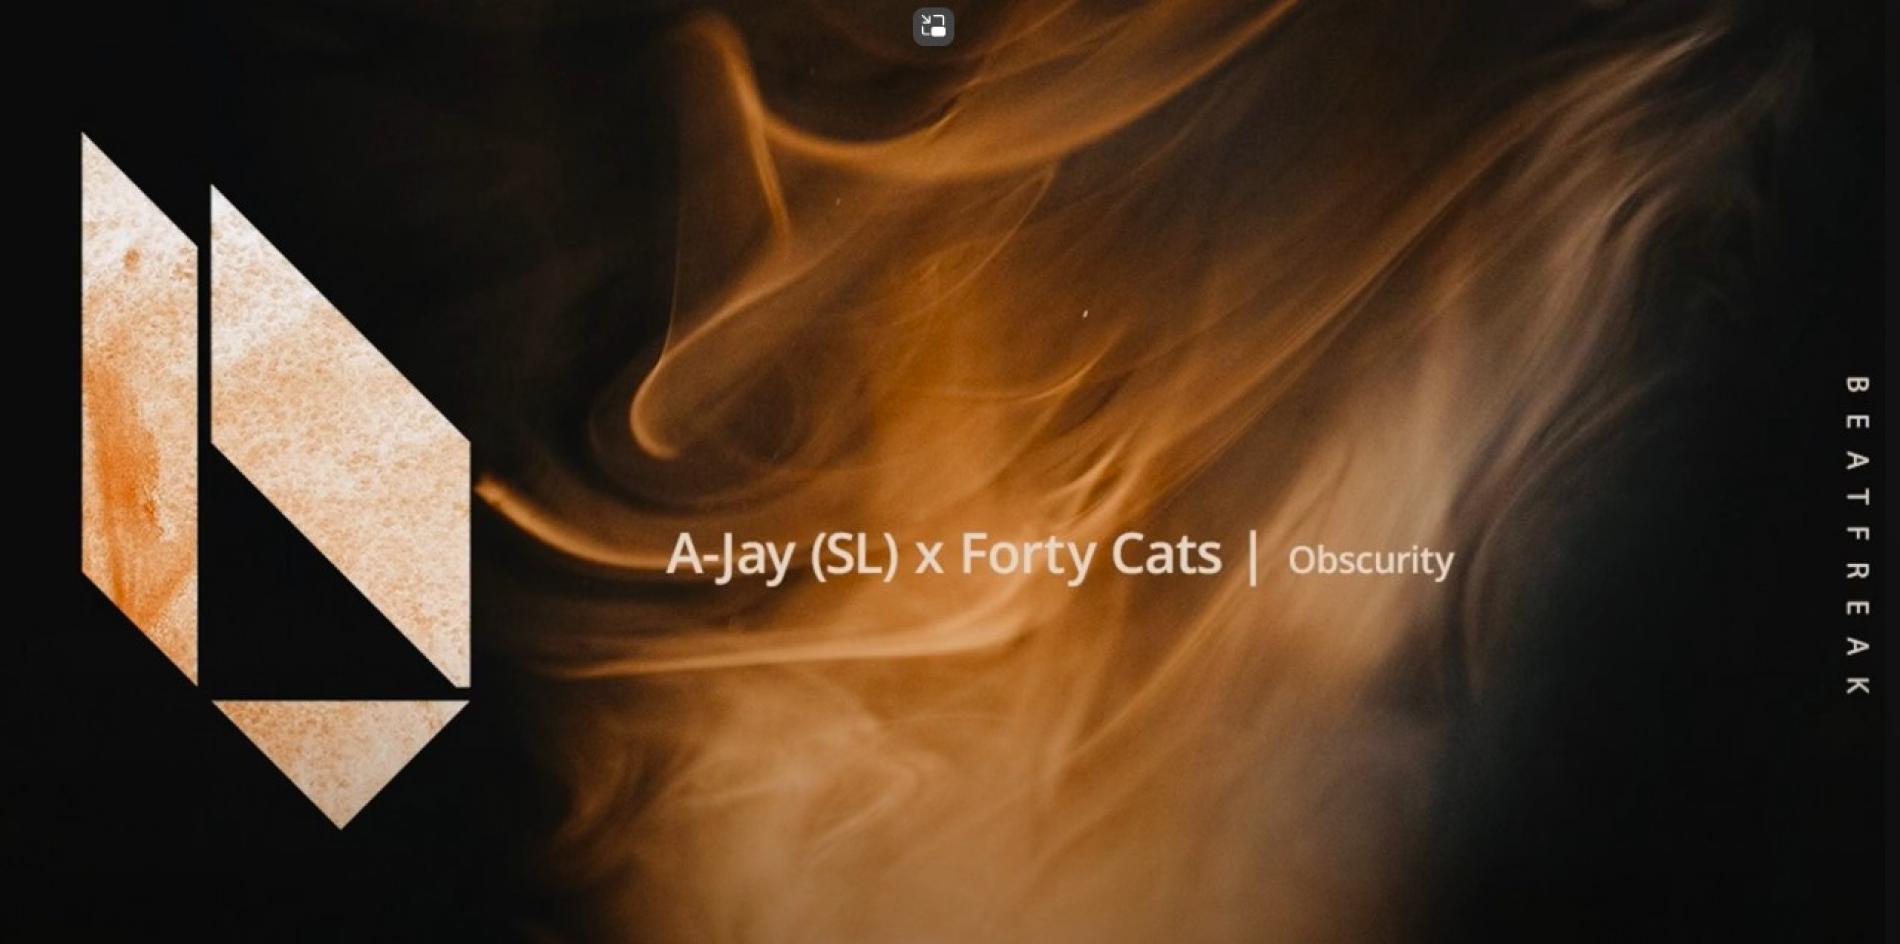 New Music : A-Jay x Forty Cats – Obscurity